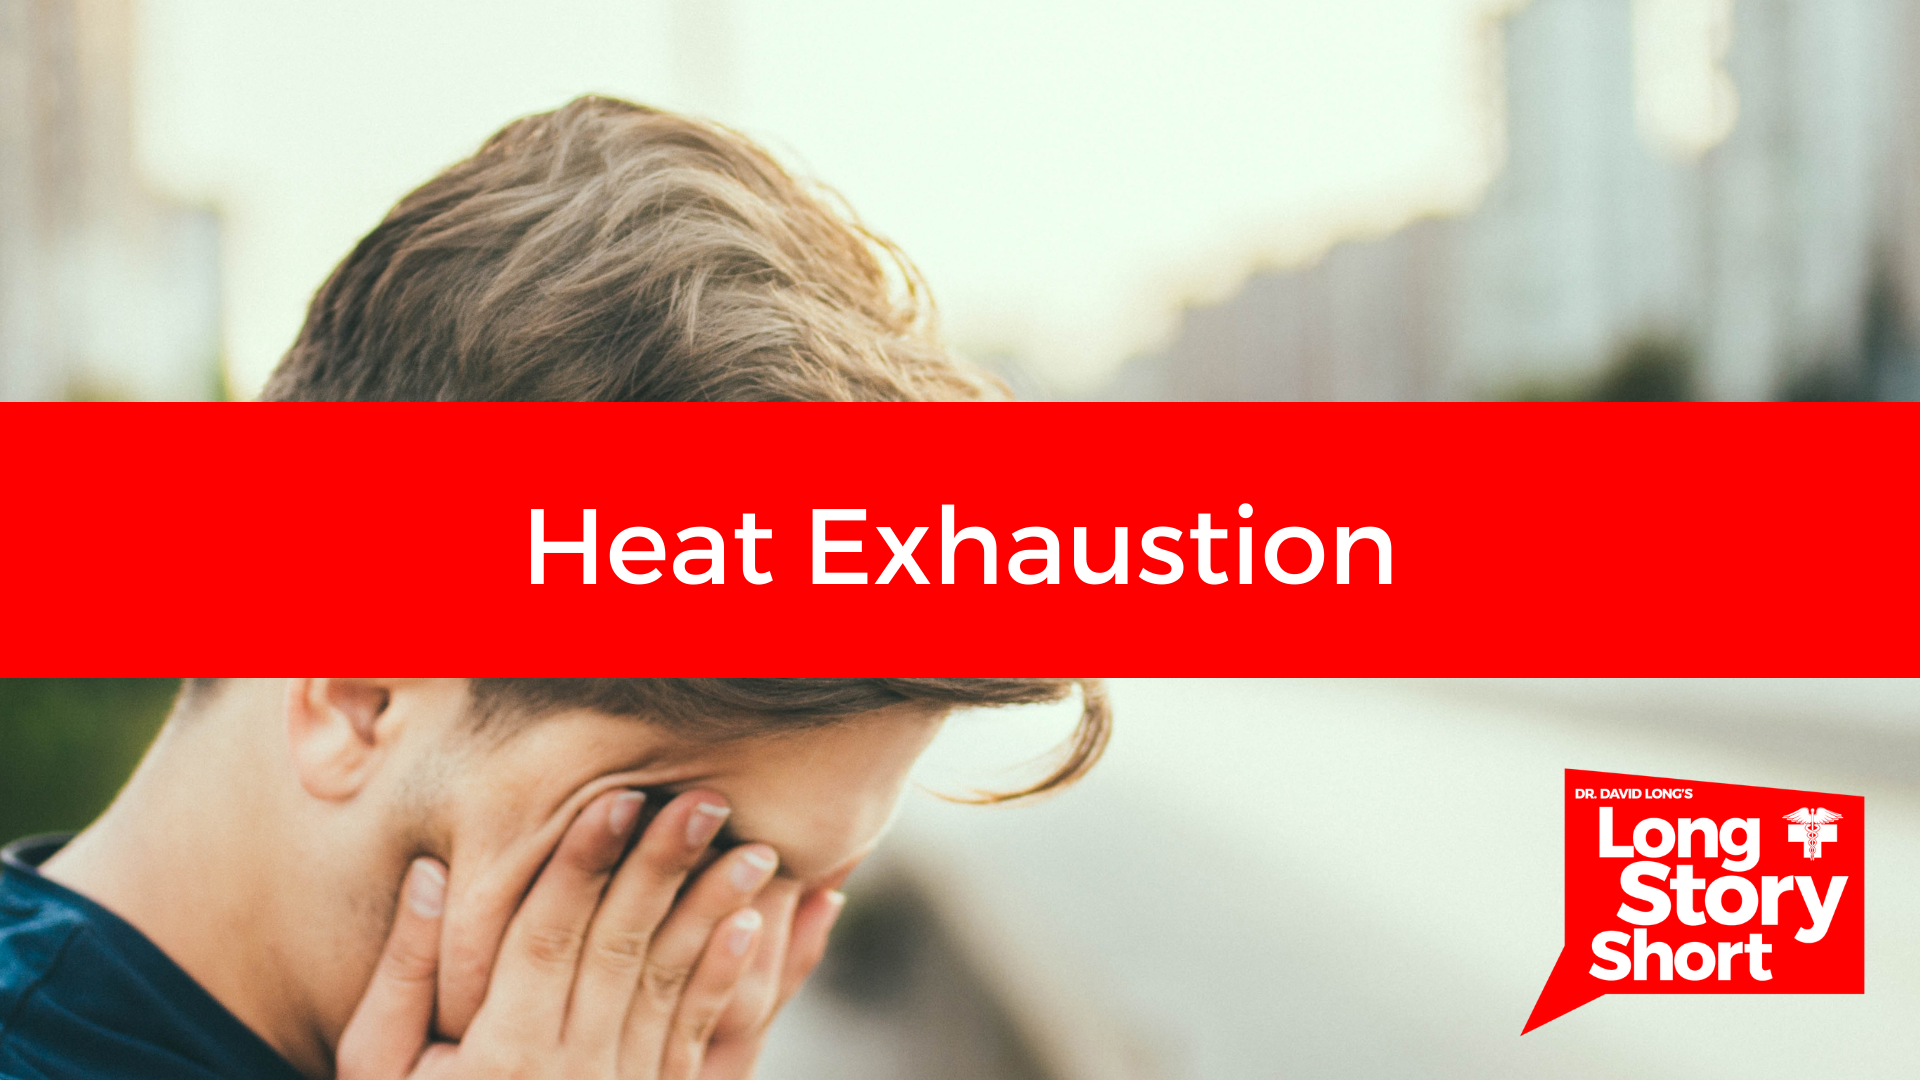 You are currently viewing Heat Exhaustion – Dr. David Long